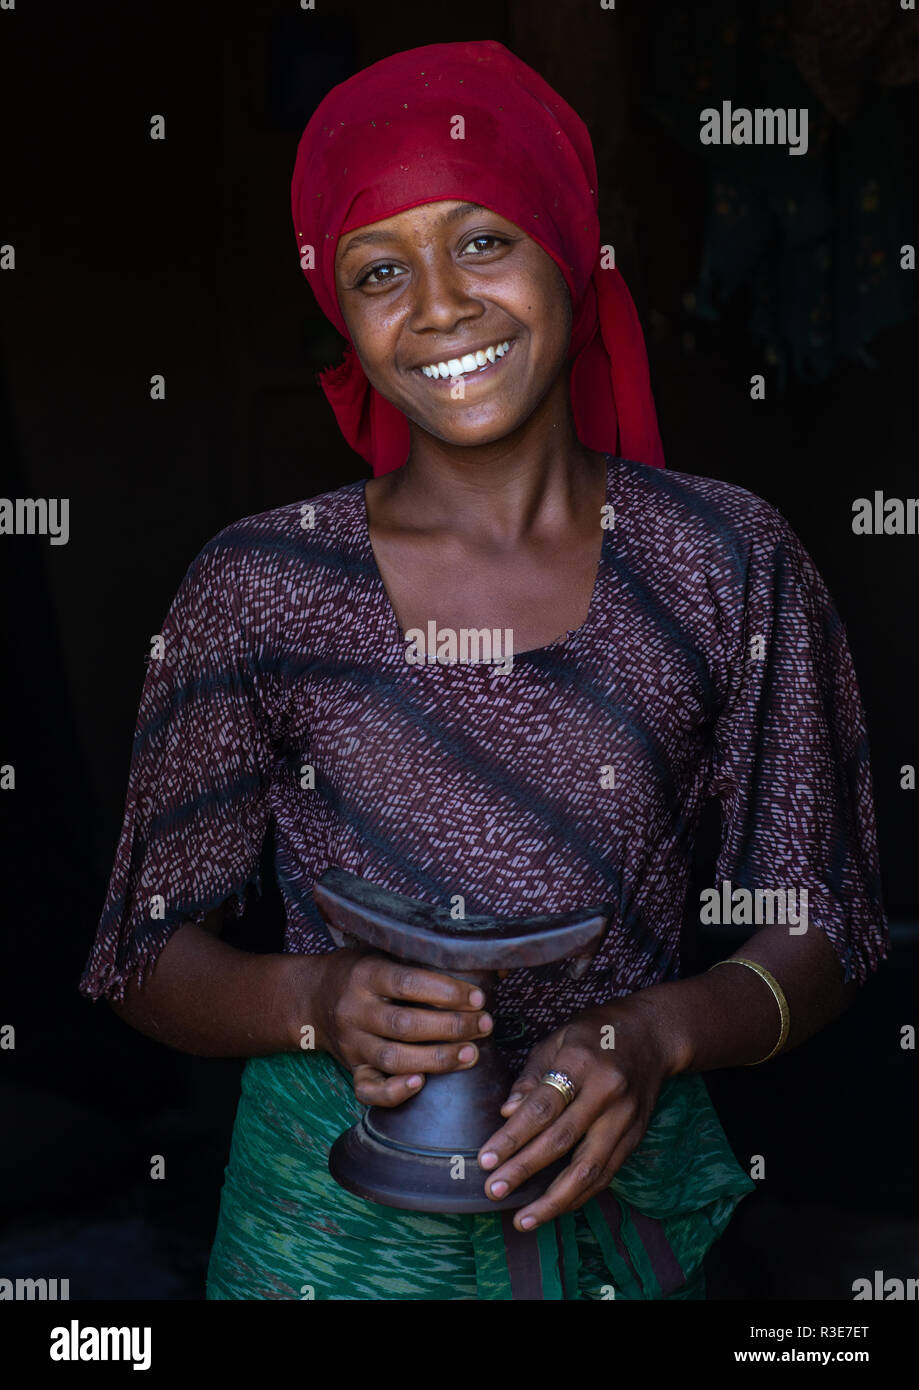 Portrait of a smiling raya tribe girl holding a wooden pillow, Afar Region, Chifra, Ethiopia Stock Photo